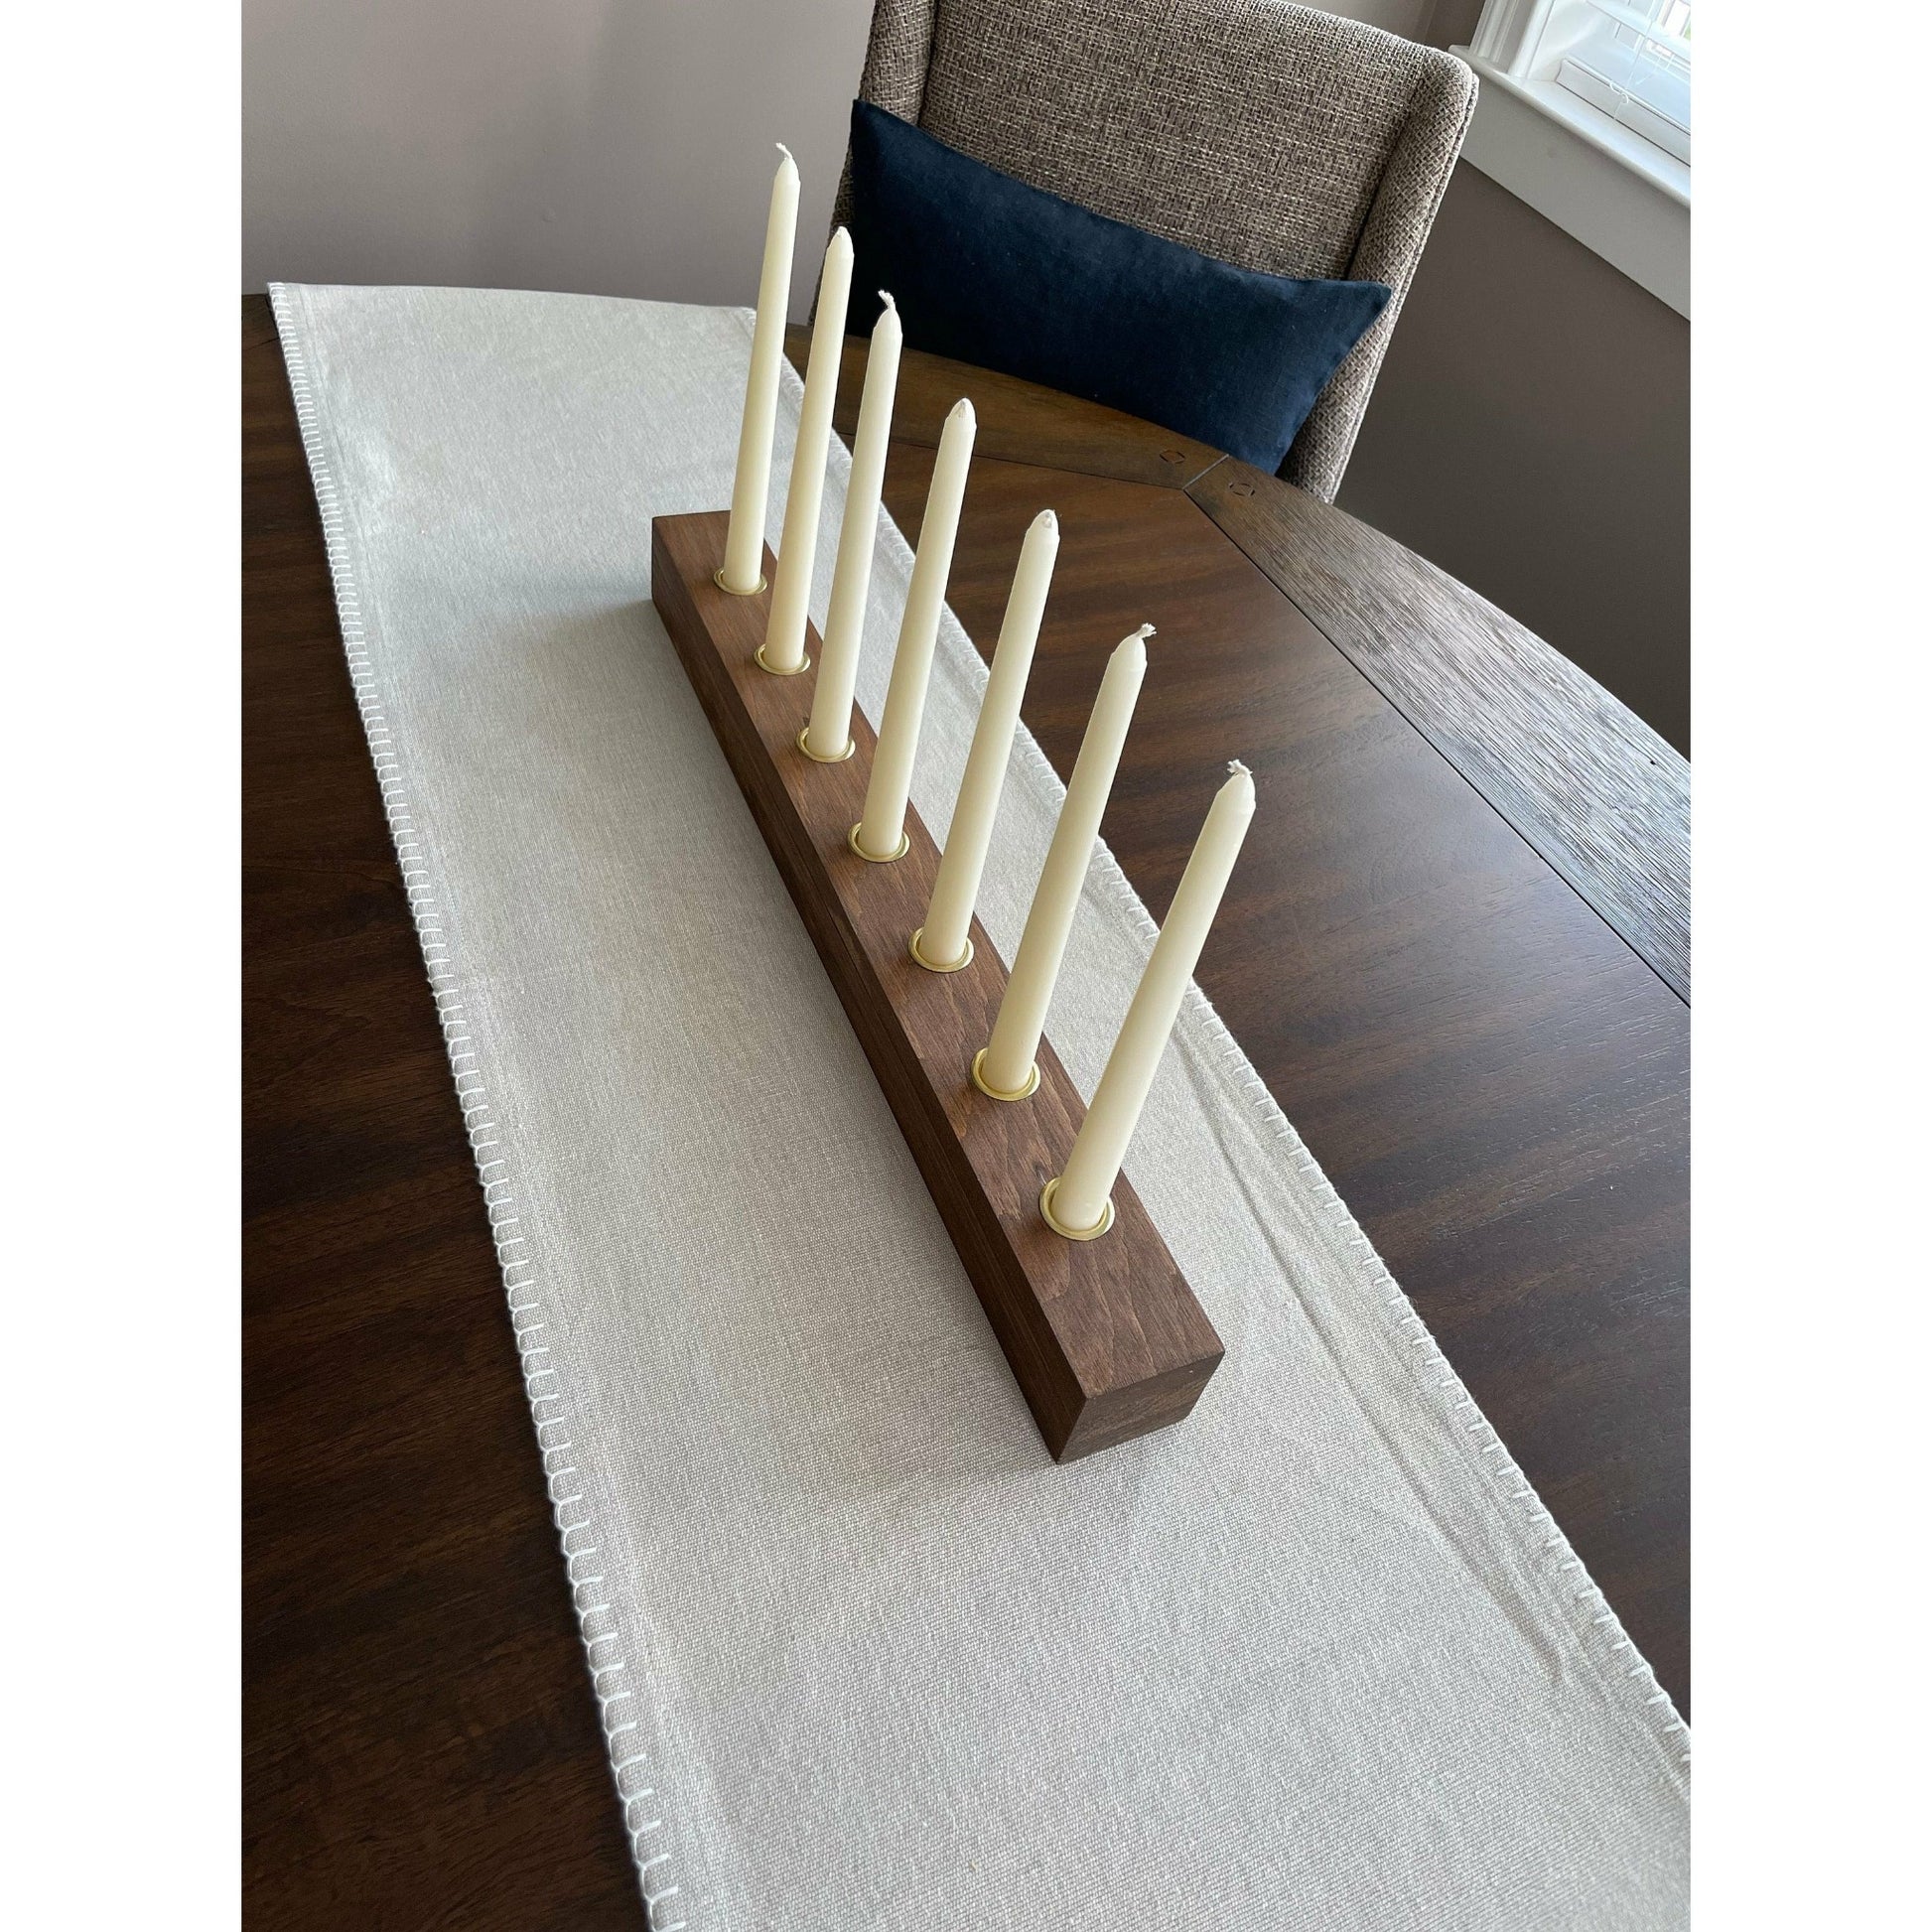 Long Taper Candleholder Holds 7 Candles Dining Table Centerpiece